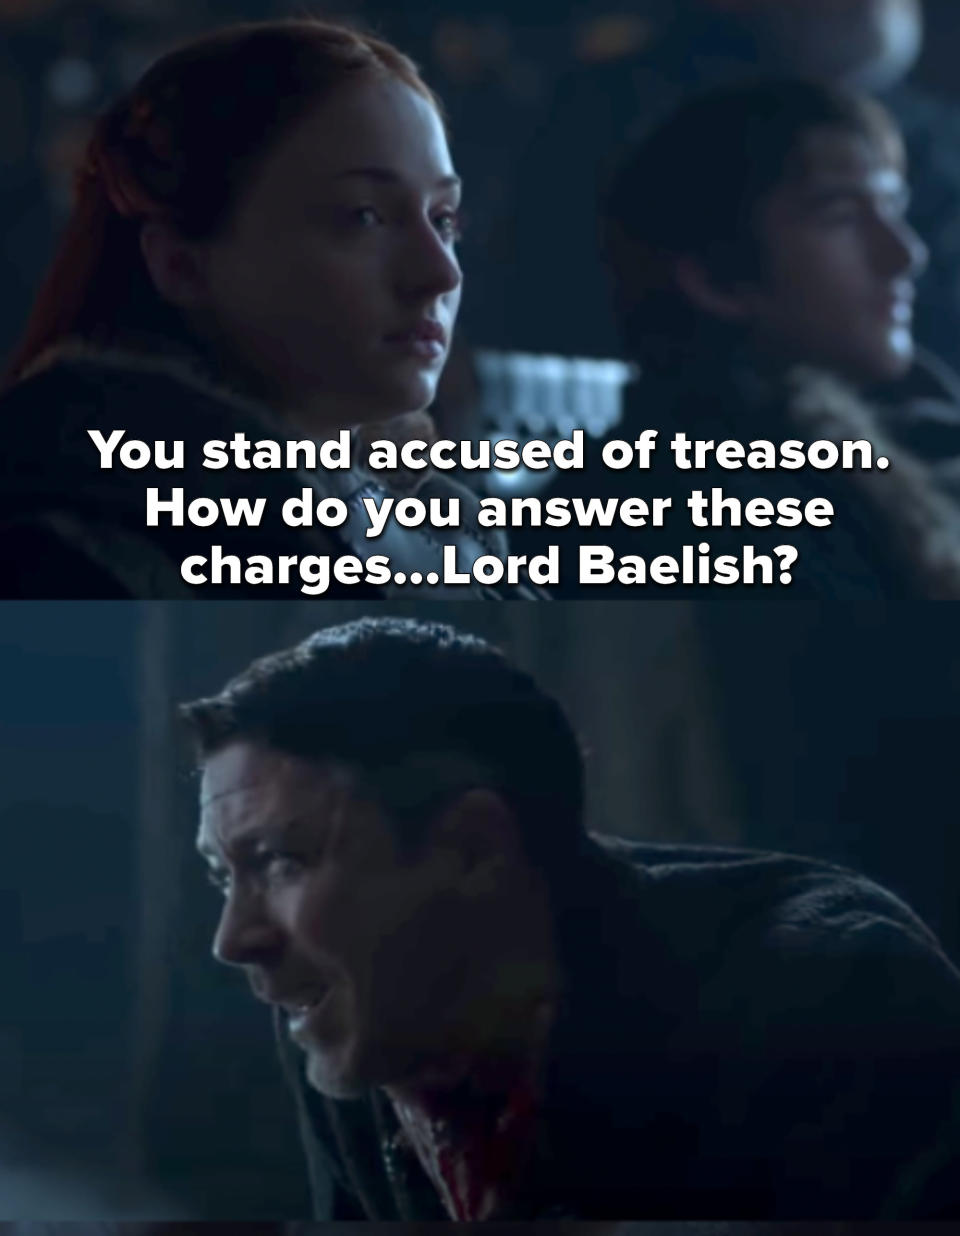 Sansa says "You stand accused of treason. How do you answer these charges...Lord Baelish" and then Arya cuts his throat